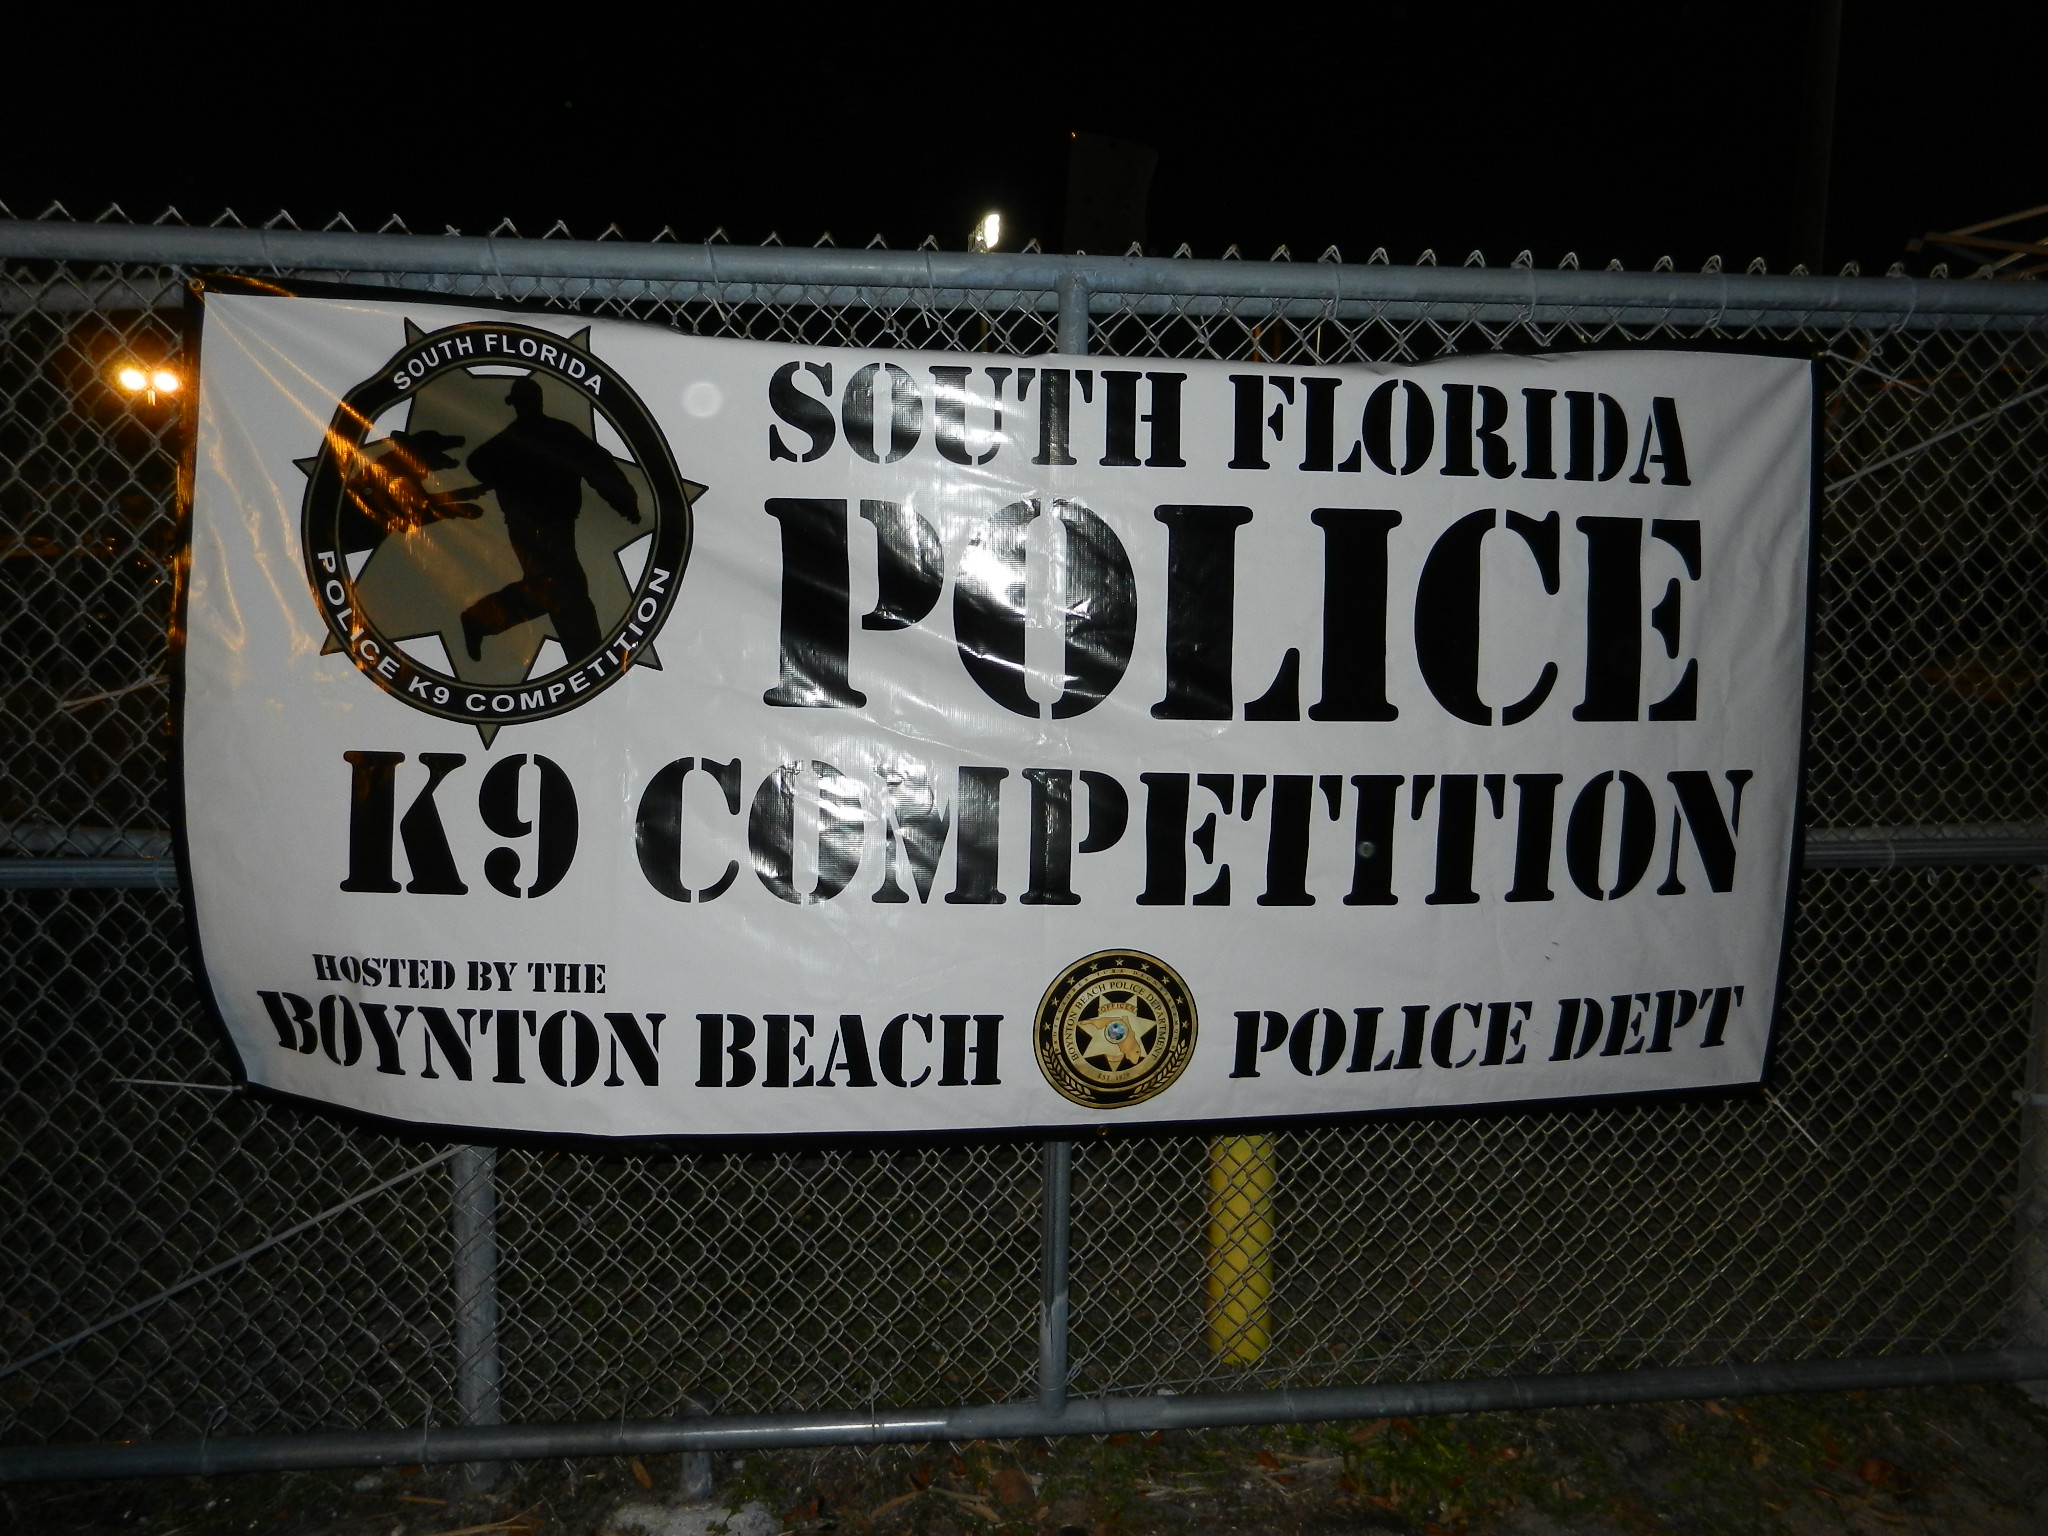 2015 South Florida Police K9 Competition